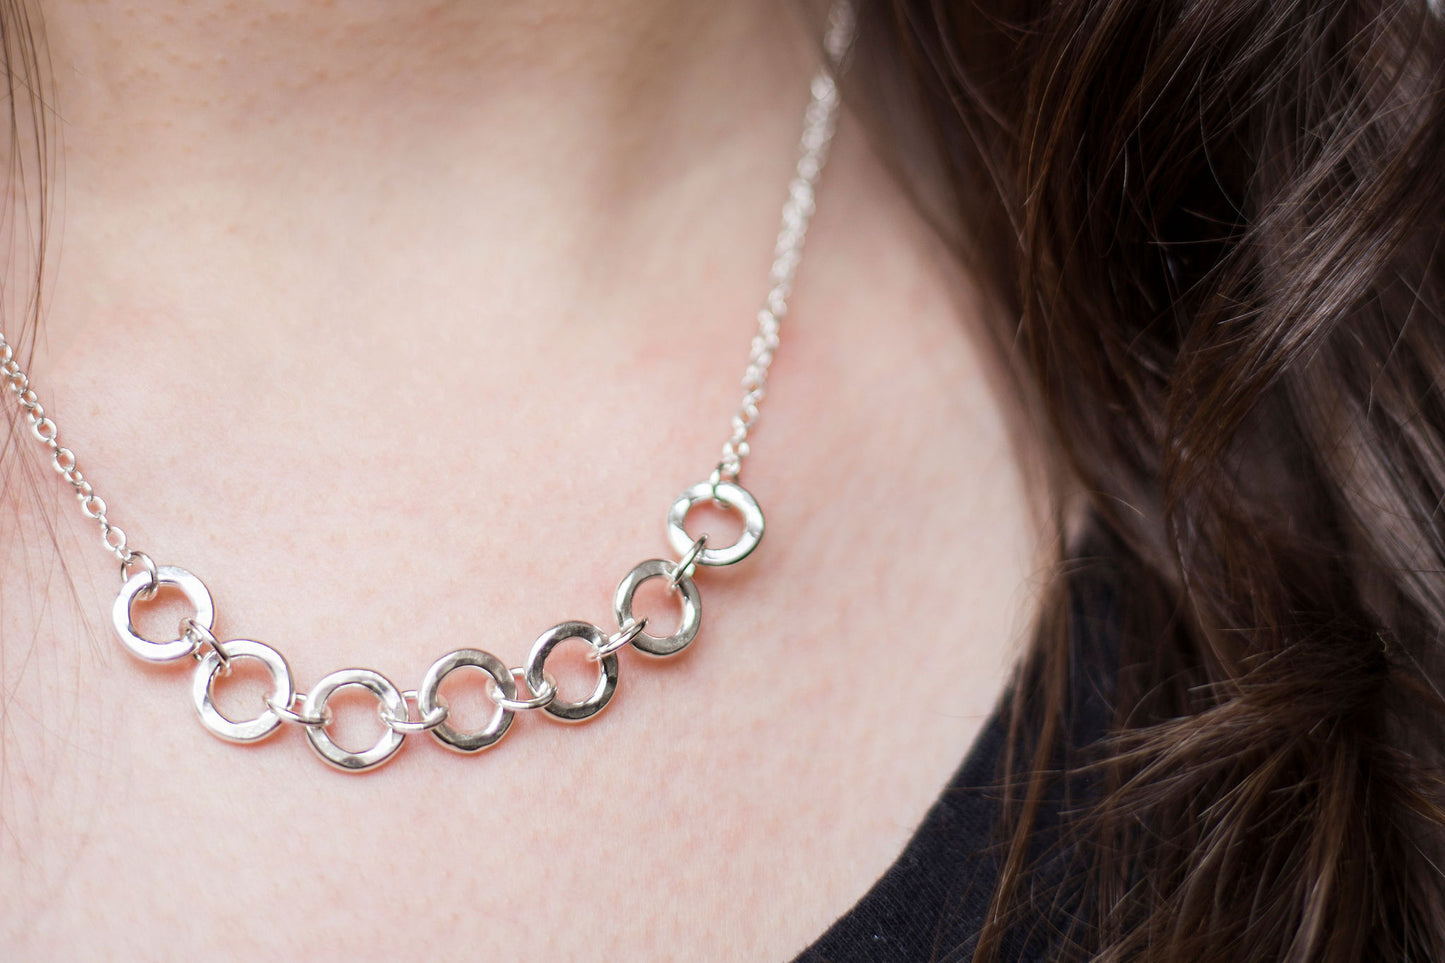 seven silver links necklace worn with a black t-shirt, handmade by Anna Calvert Jewellery